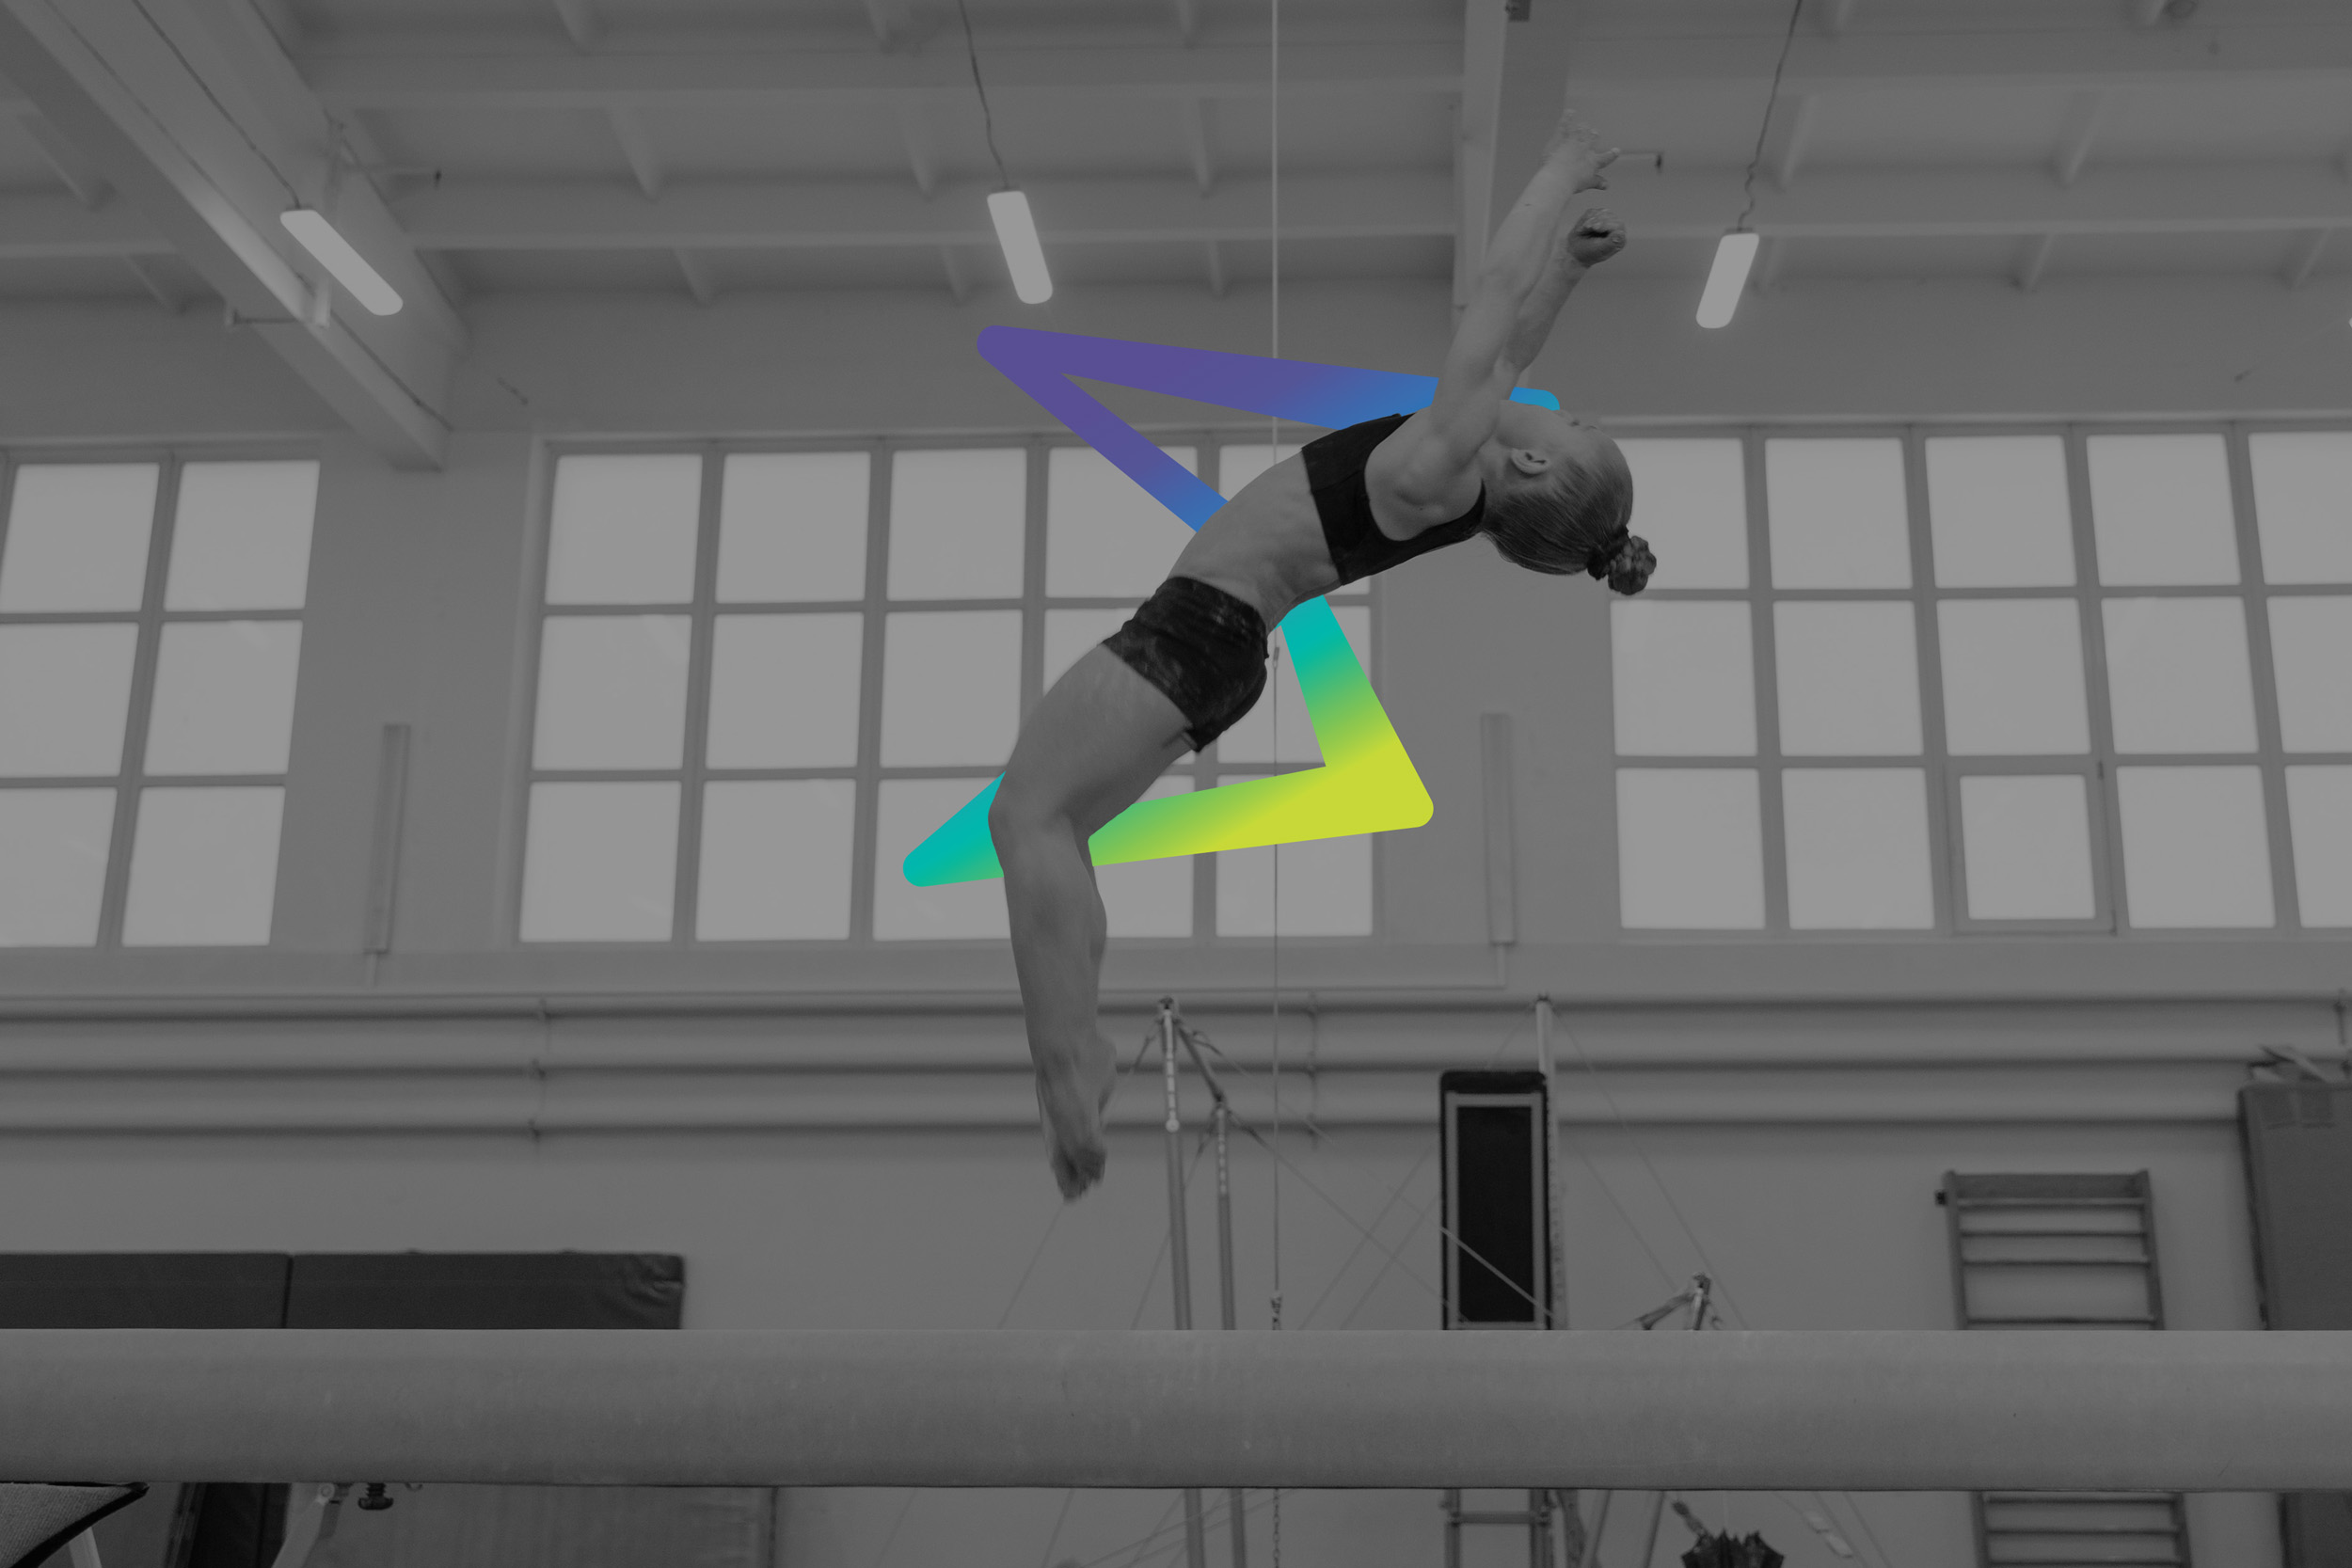 Affinity new brand visual identity design - logo graphic integrated with photographic image of gymnast